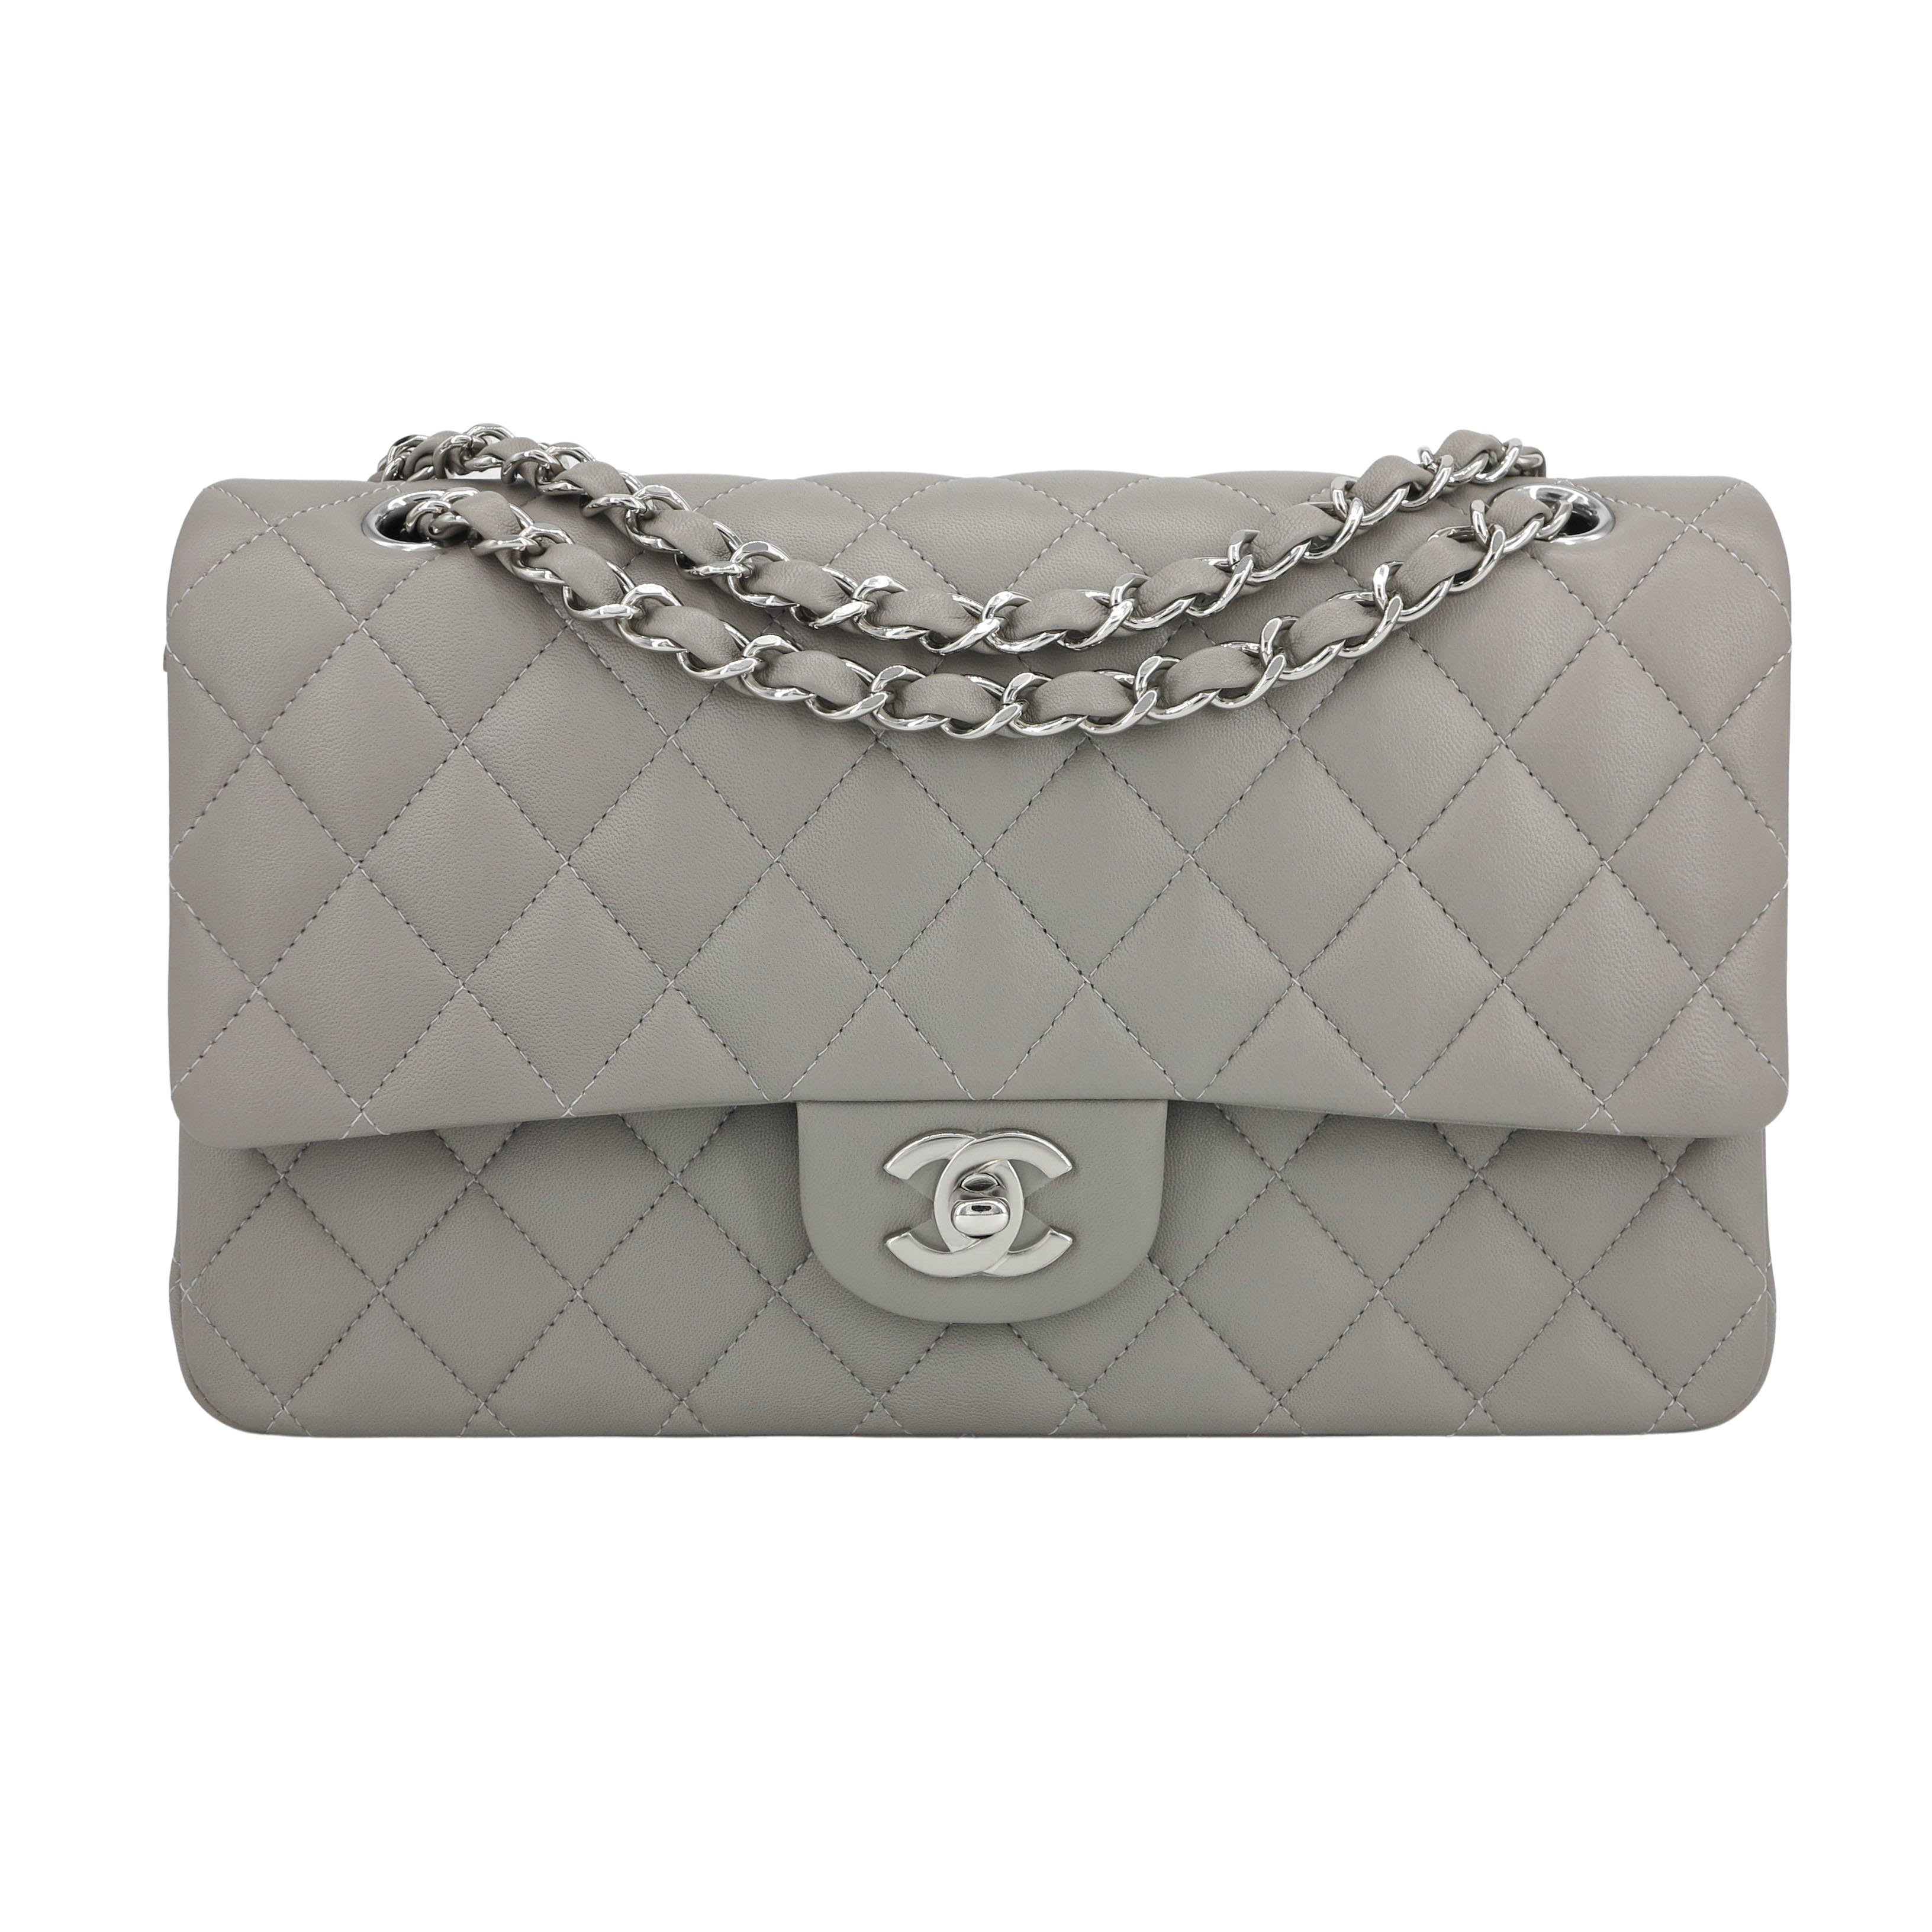 CHANEL Grey Quilted Caviar Leather Jumbo Classic Double Flap Bag